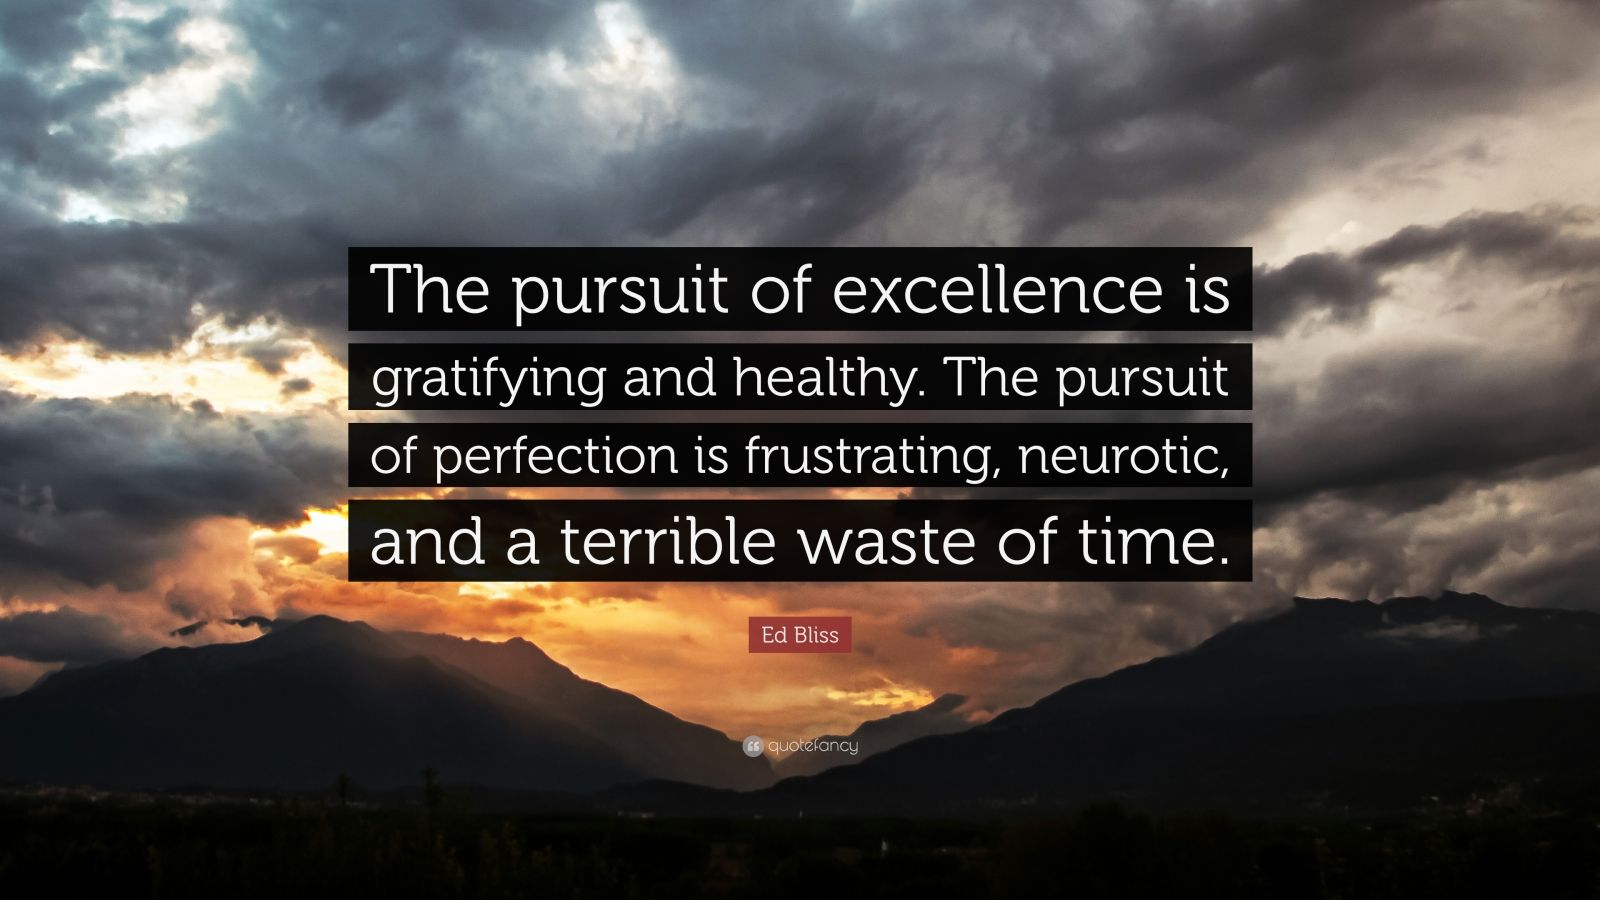 Ed Bliss Quote: “The pursuit of excellence is gratifying and healthy